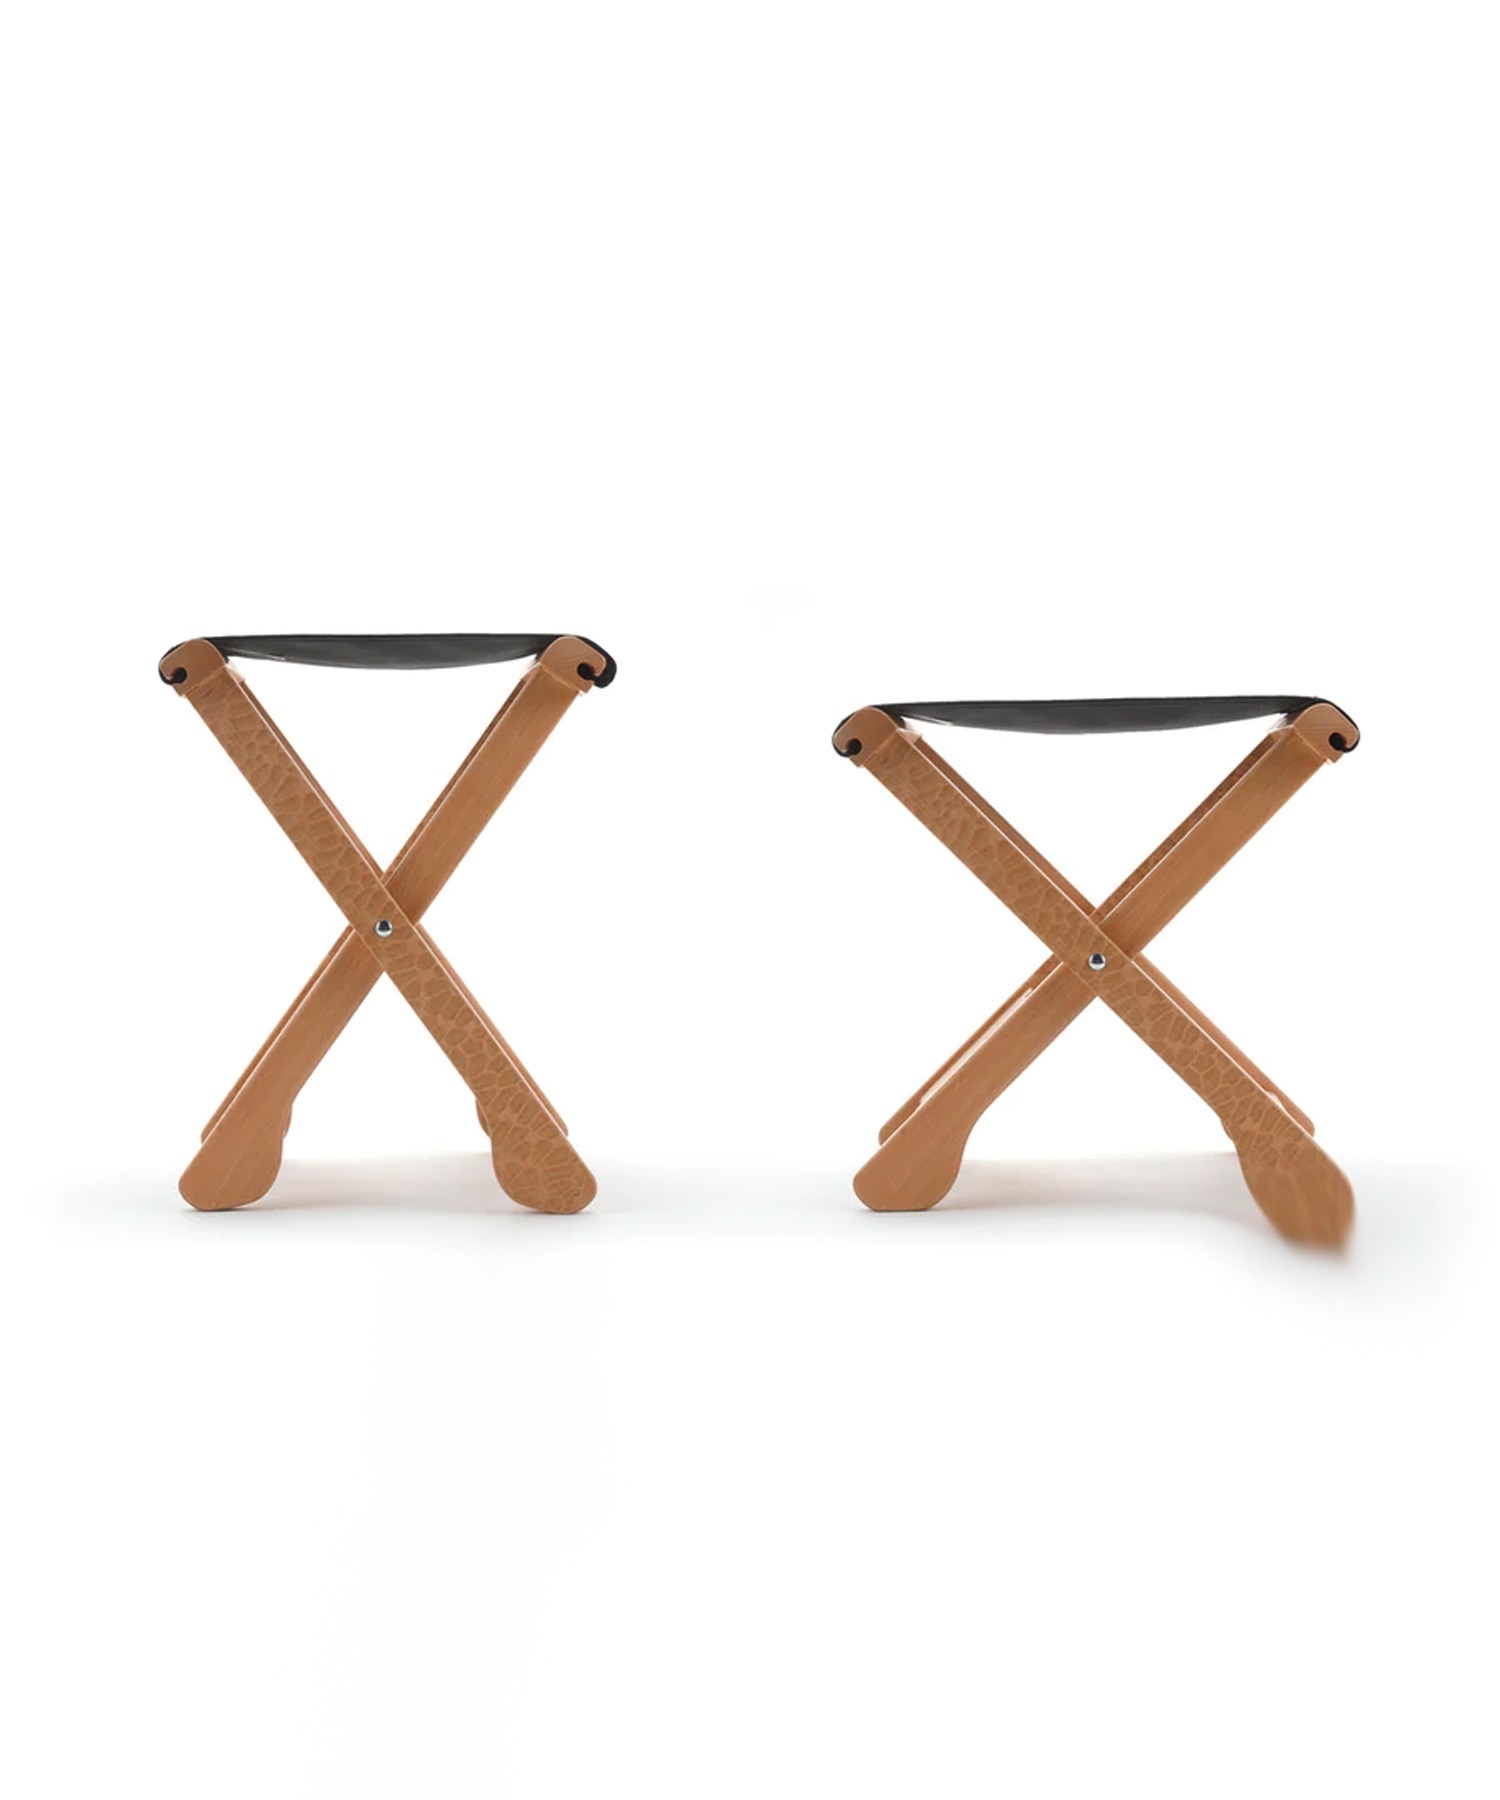 ROOSTER GEAR MARKET ルースターギアマーケット WOOD STOOL 折り畳み 椅子 コンパクト RGM ムラサキスポーツ(COYOT-ONESIZE)